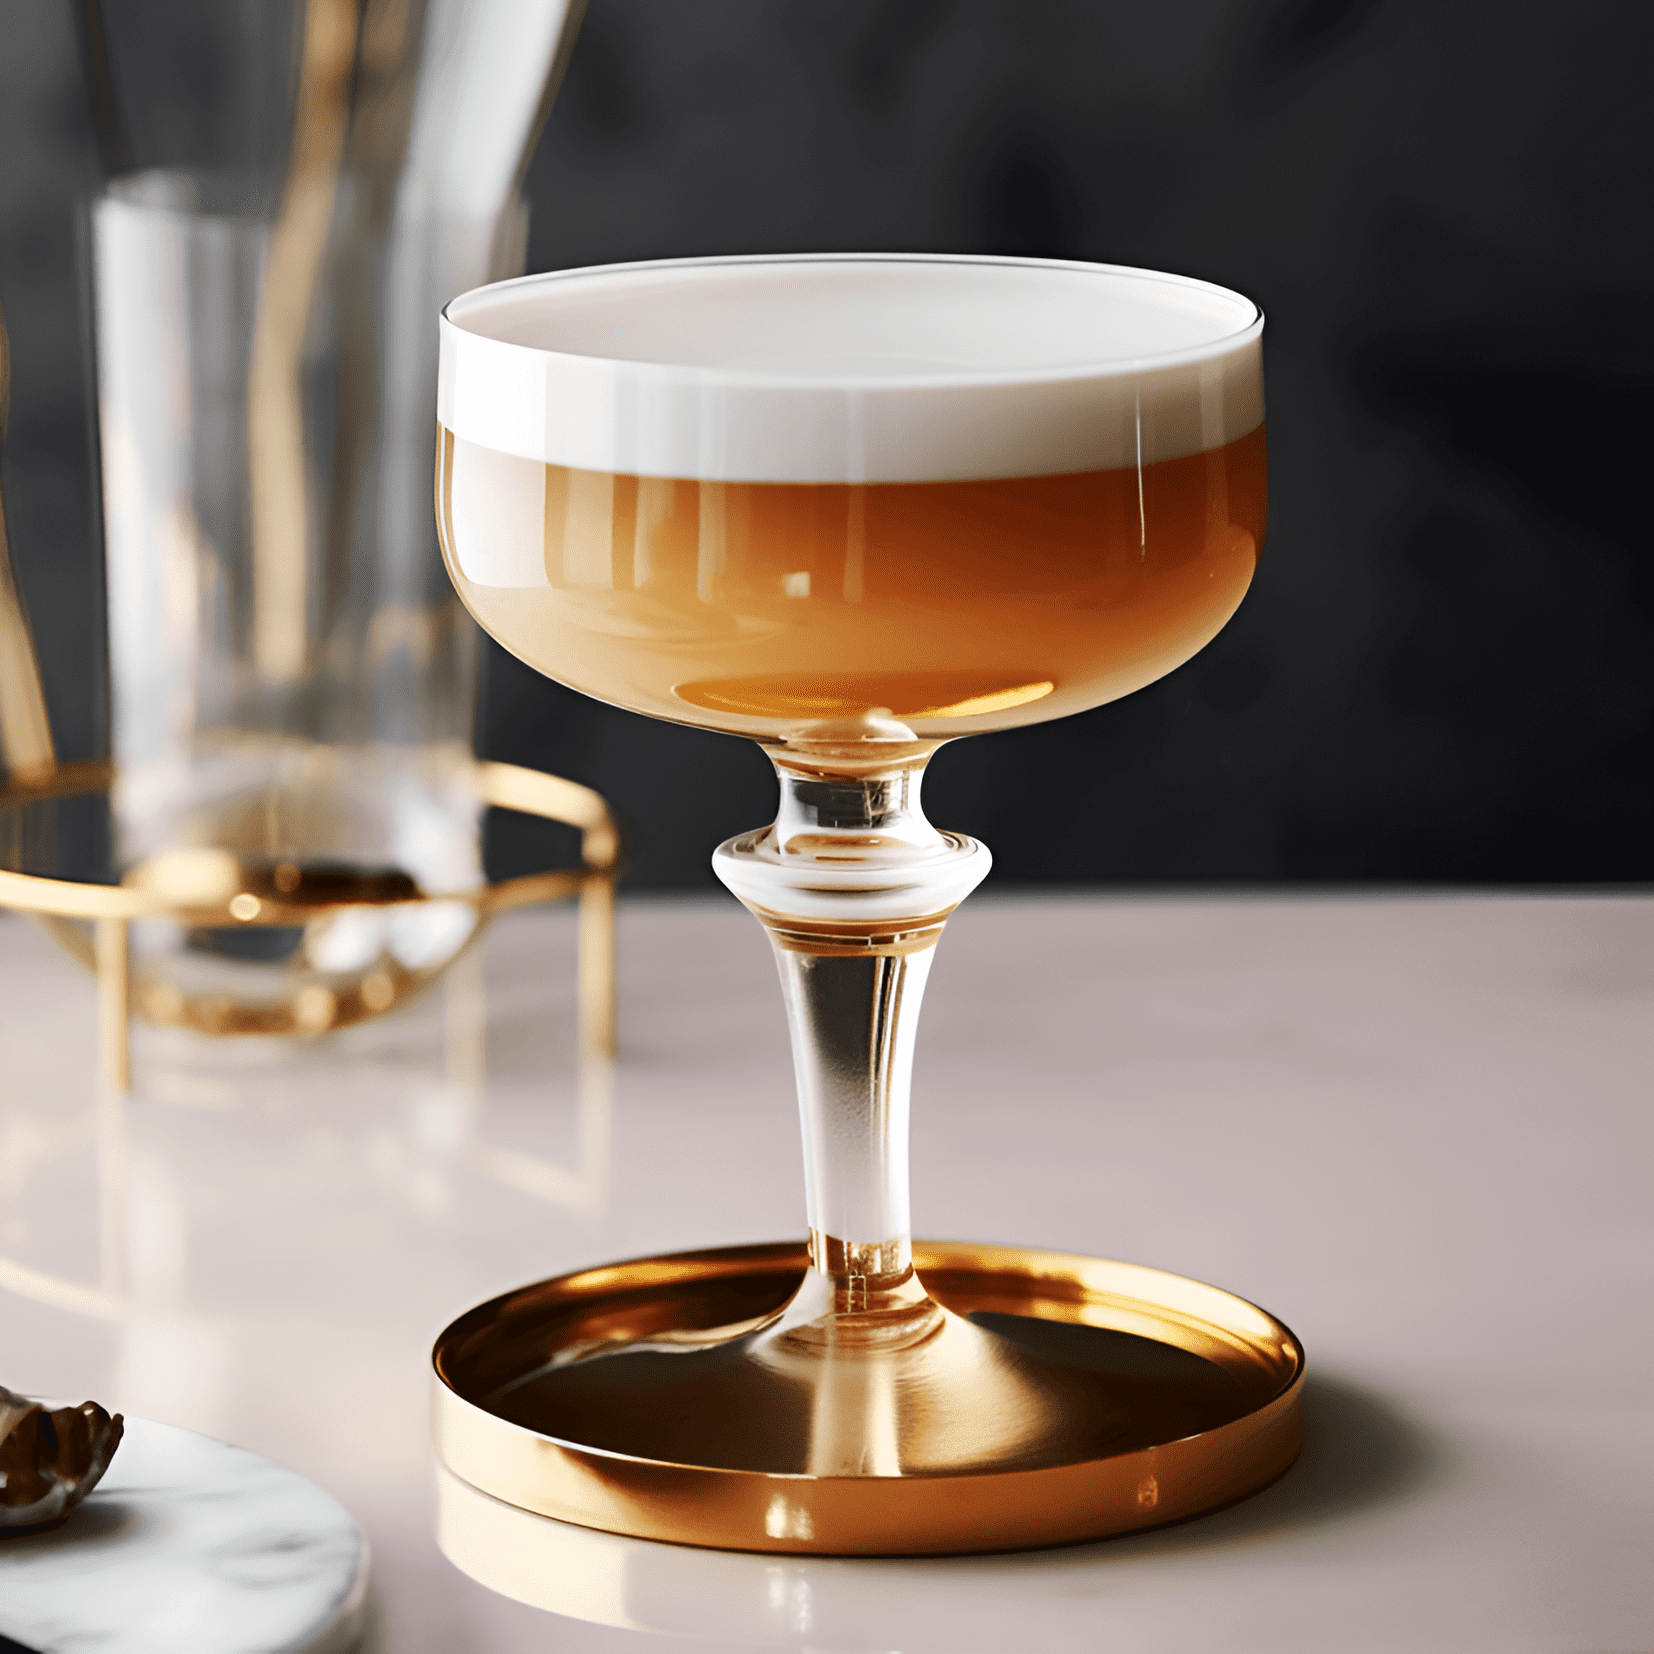 Alexander Cocktail Recipe - The Alexander cocktail is a rich, creamy, and indulgent drink with a smooth, velvety texture. It has a perfect balance of sweetness and warmth, with hints of chocolate and nutty flavors.